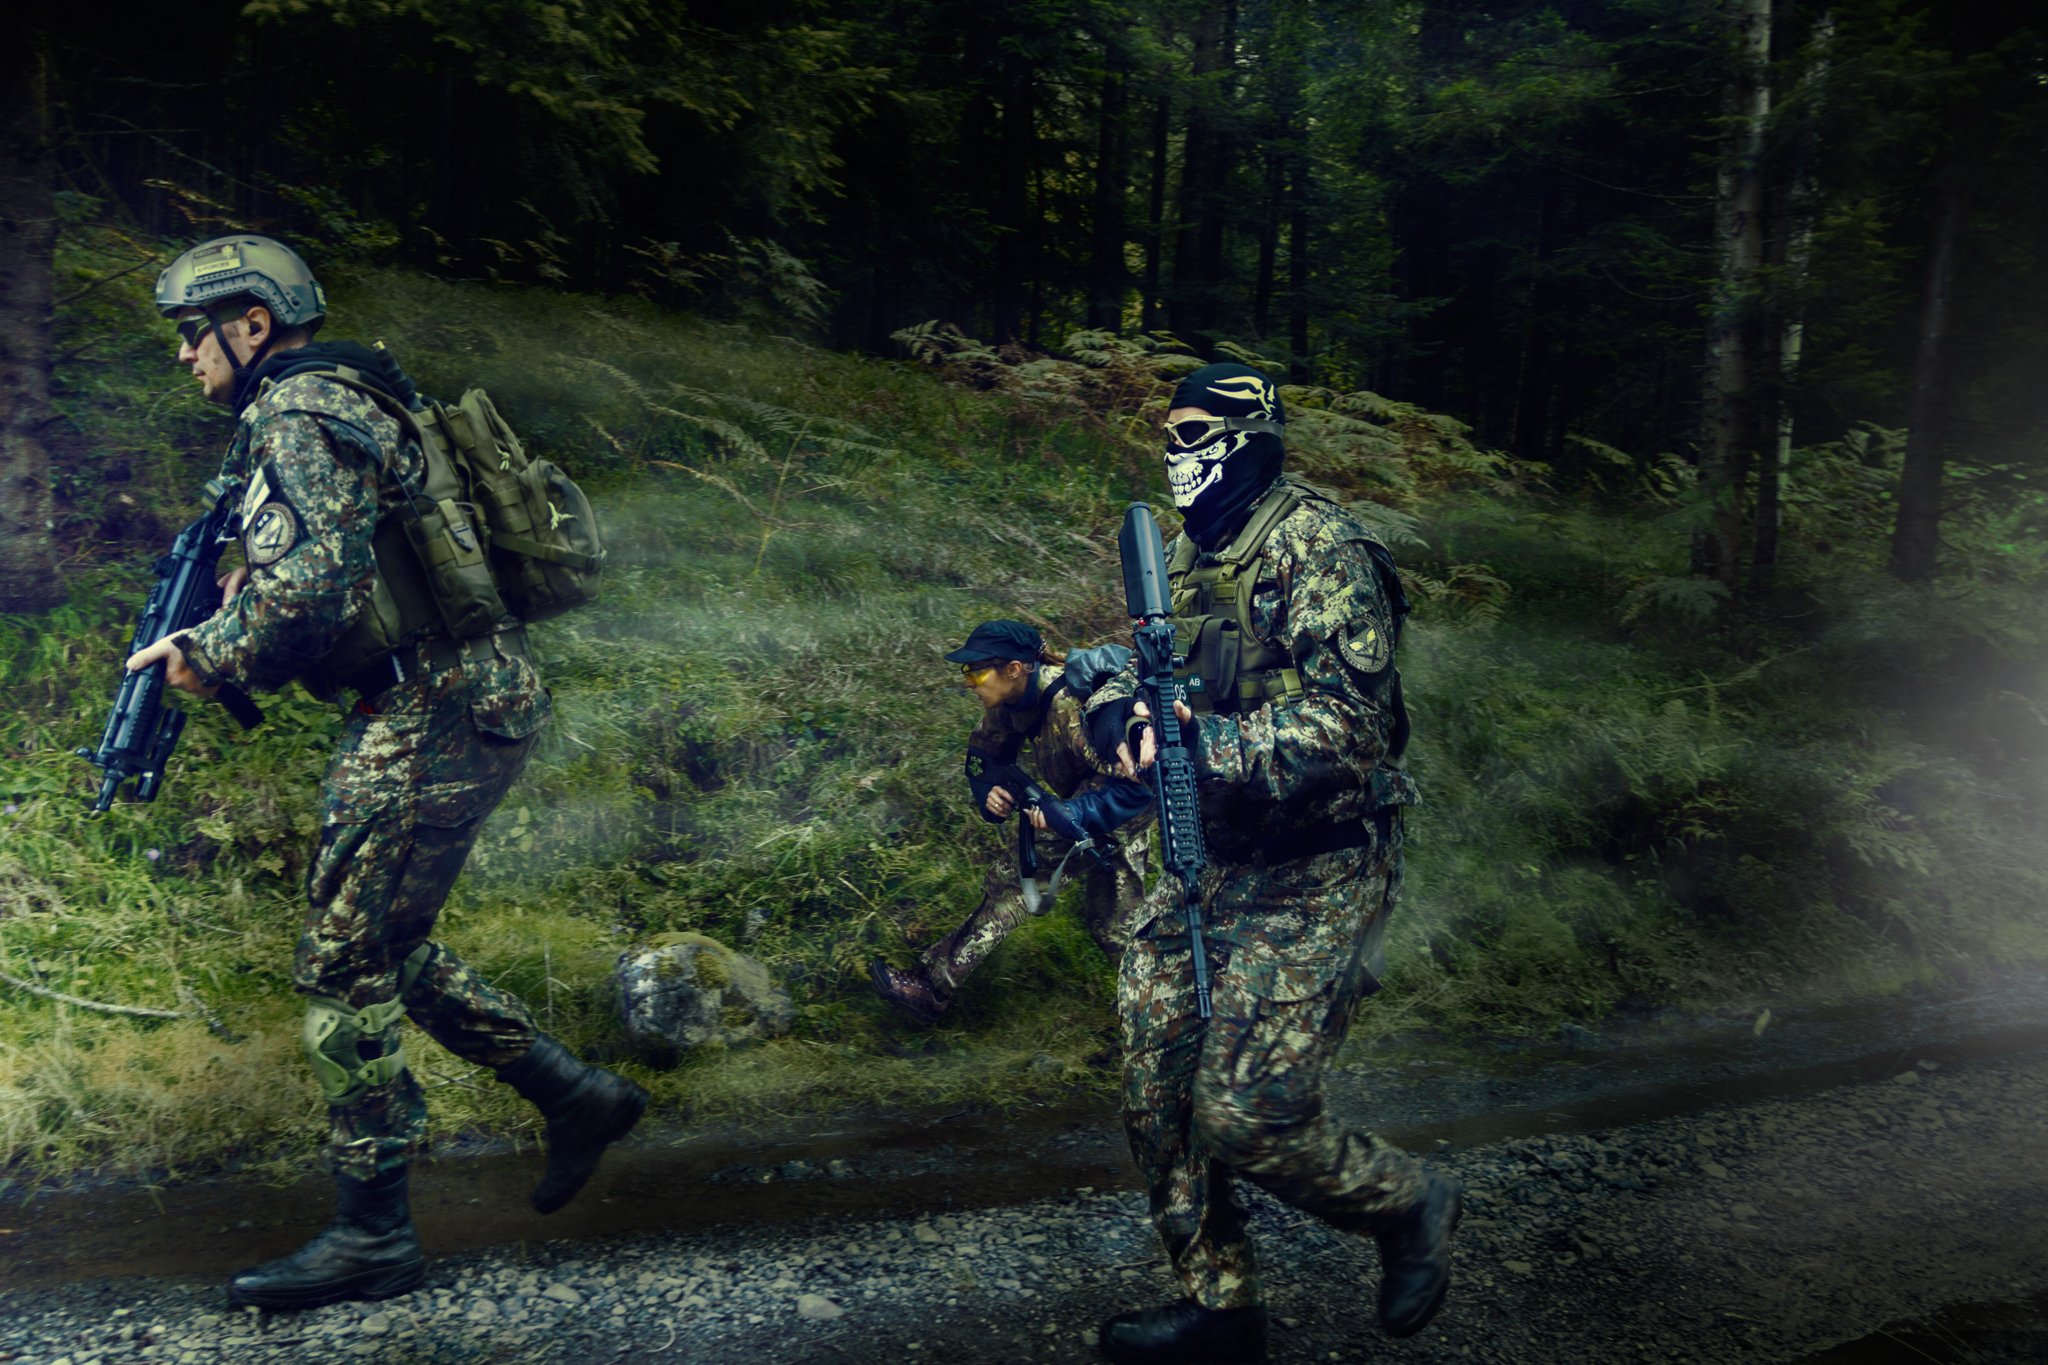 airsoft, game, escape, uniform, sport, forest, gun, competition, serbia, run, action, adrenaline, under fire, soldiers, camo, camouflage, escape plan, enemy, uncovered, exposed, protection, protected, guards, weapon, stealth, theft, play, hostile,, Марко Радовановић